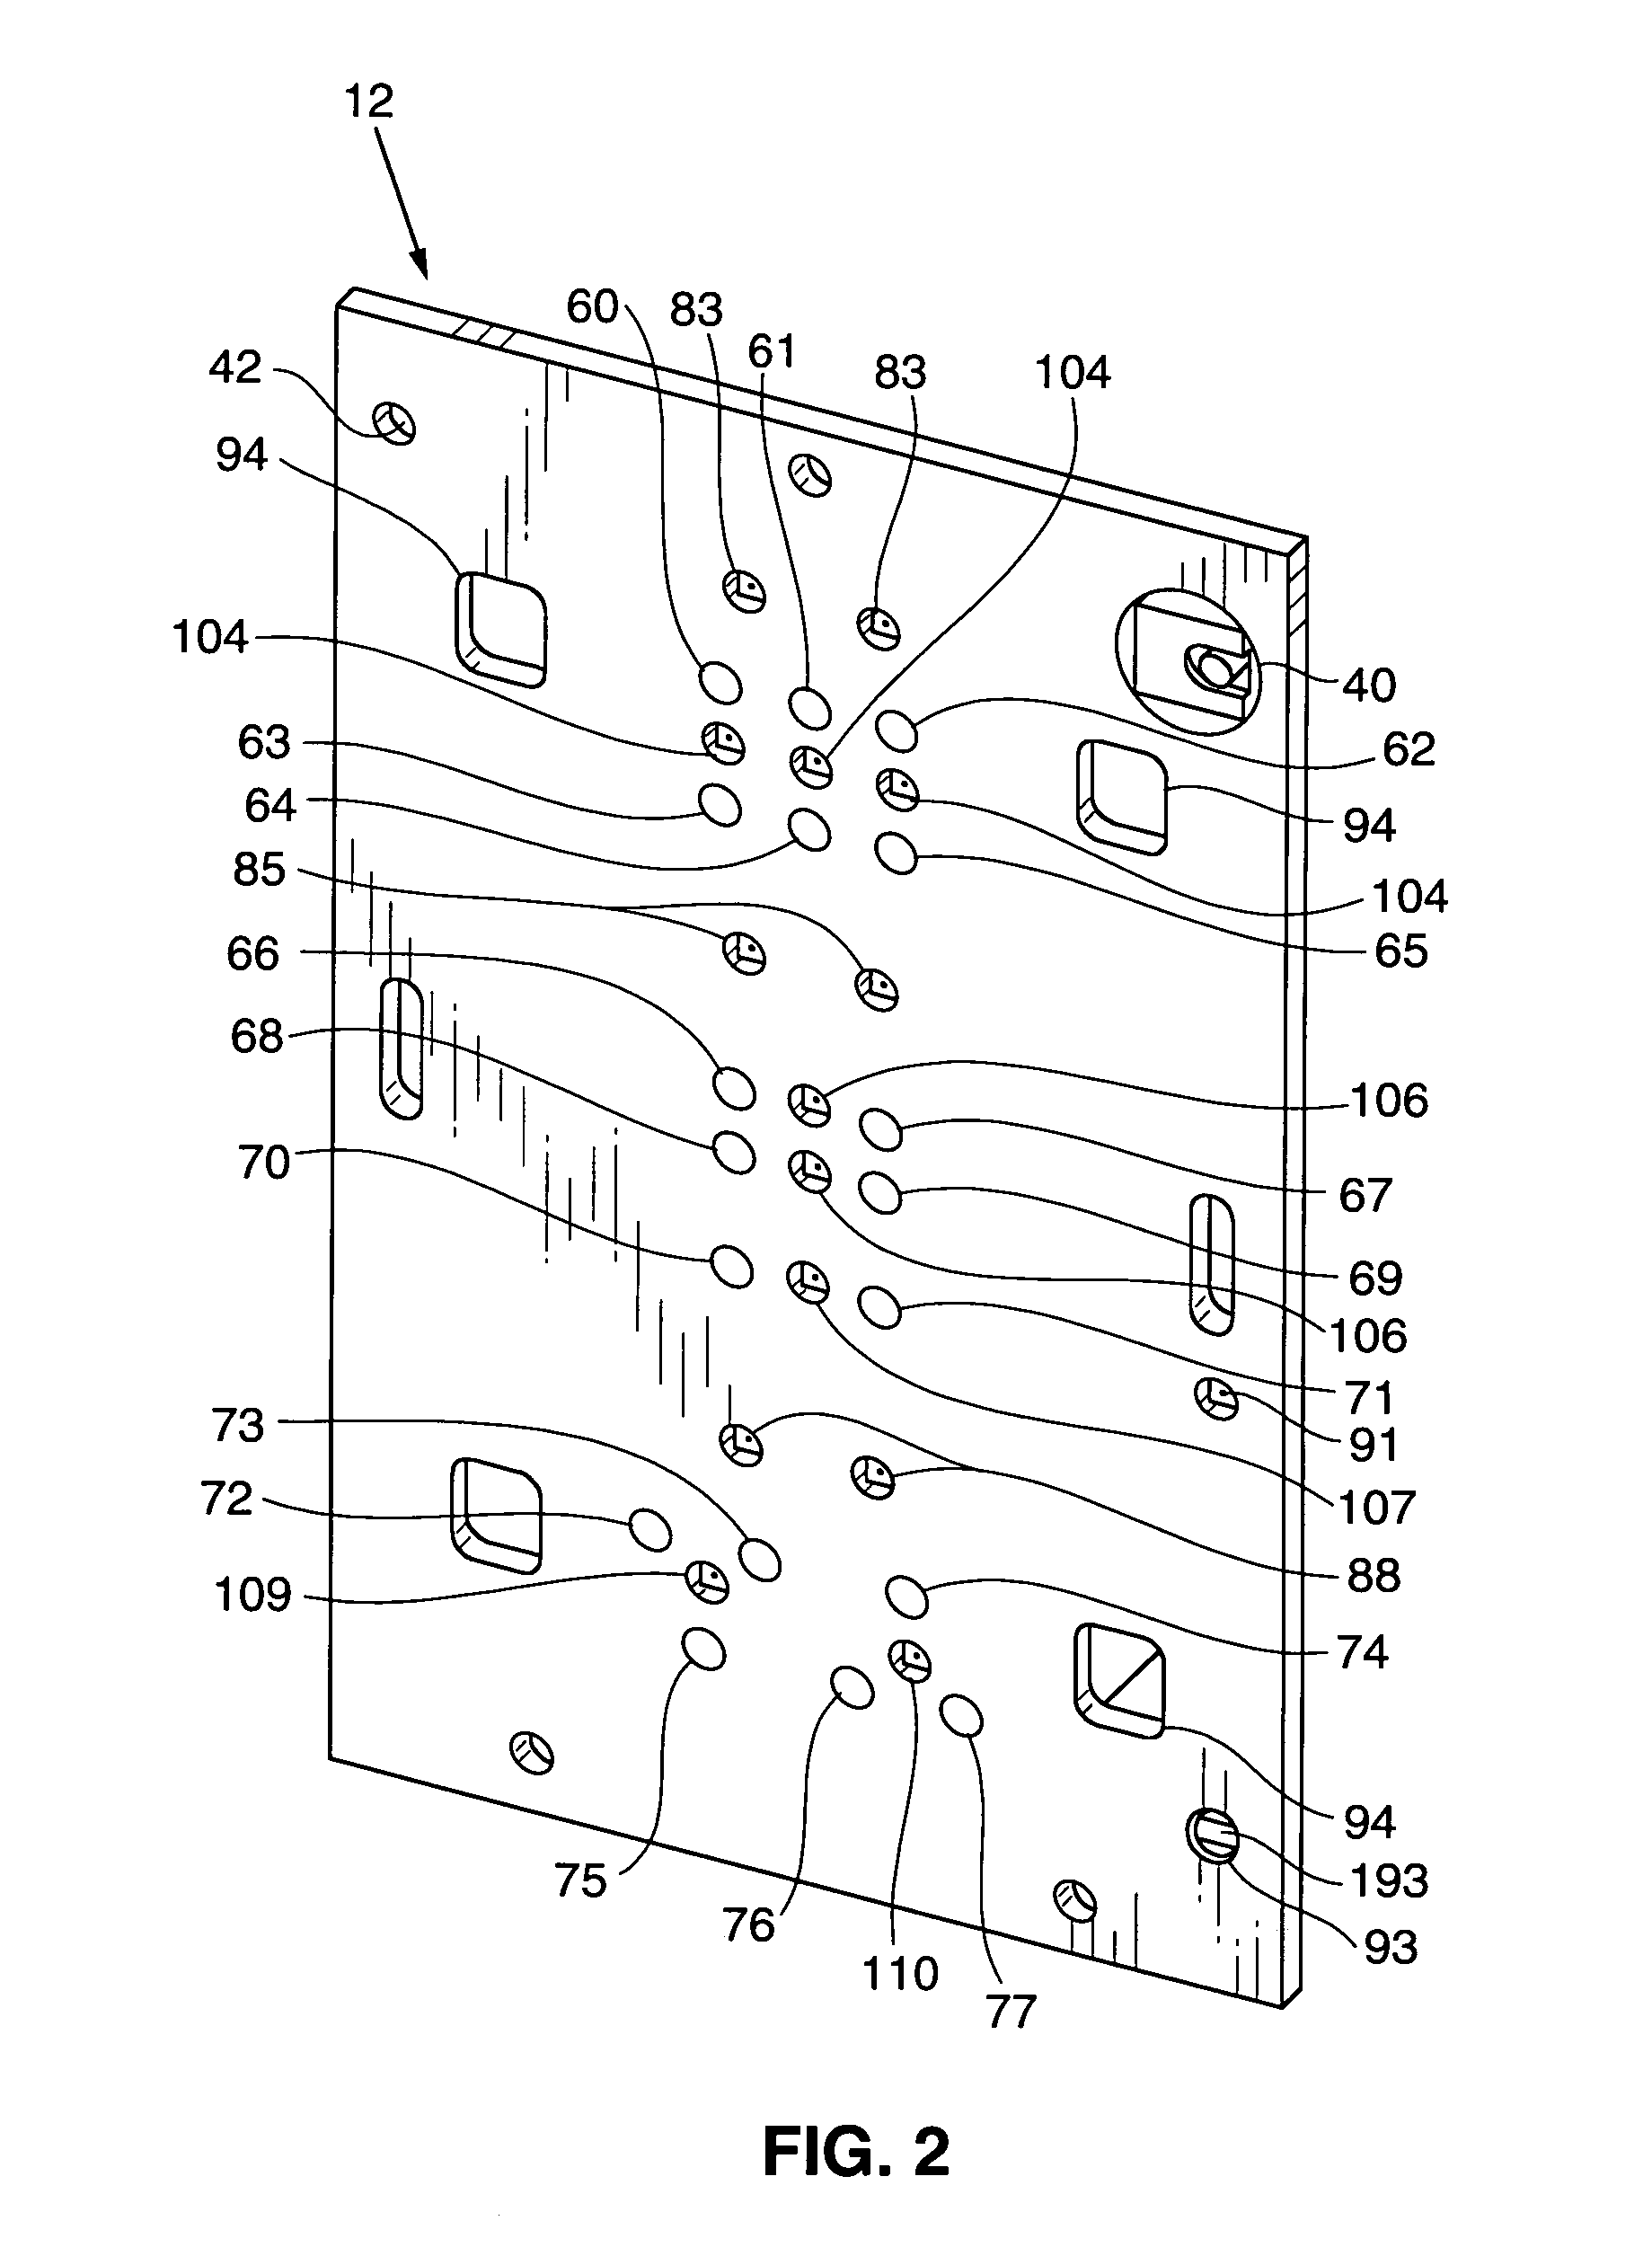 Controller having reduced control key set and method for operating same in a learning, macro, or cloning mode